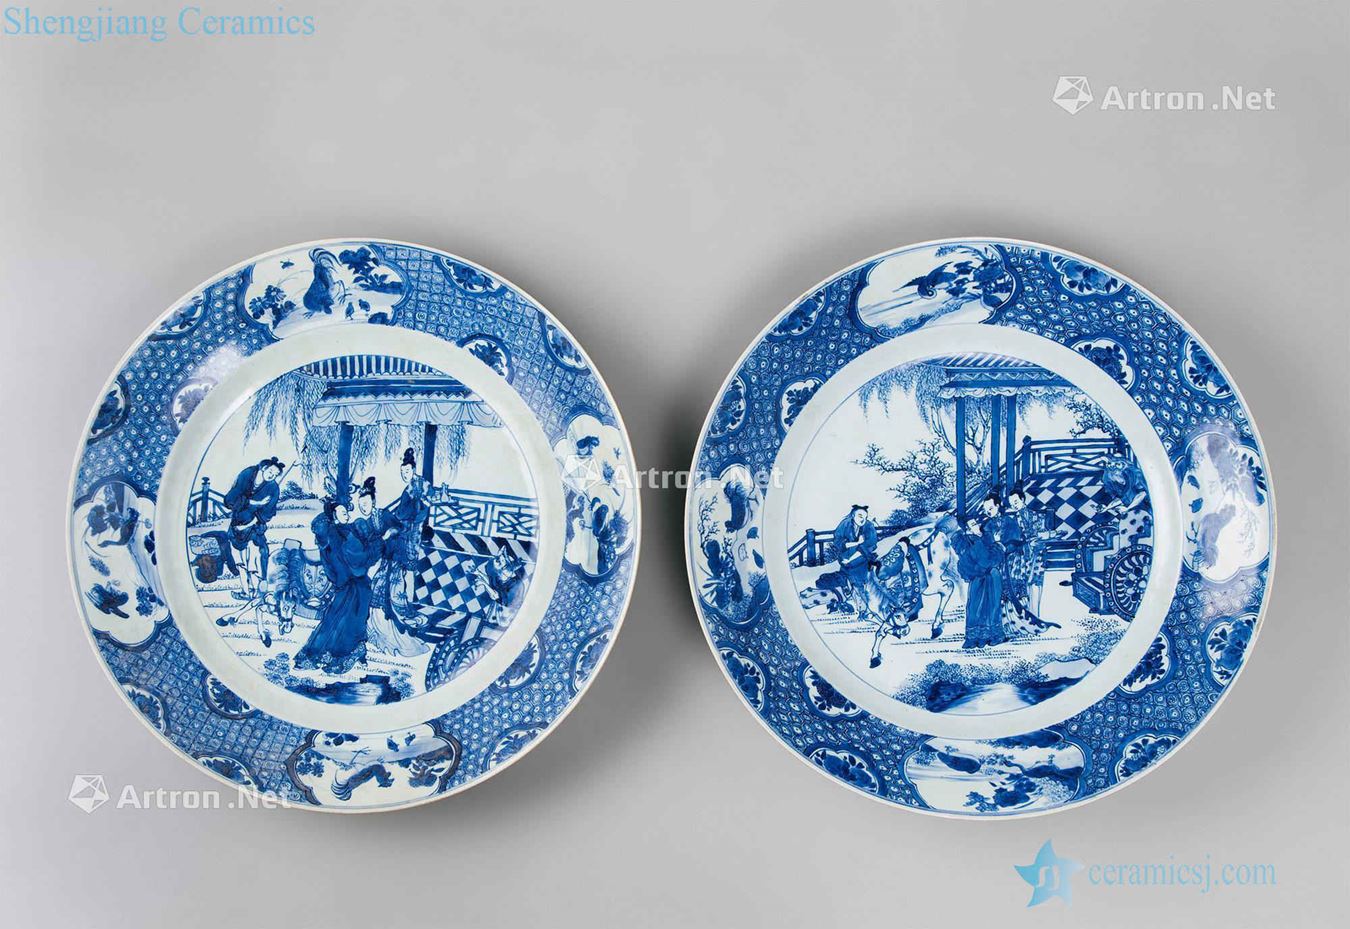 The market in the qing dynasty (1644-1911) blue and white characters (a)